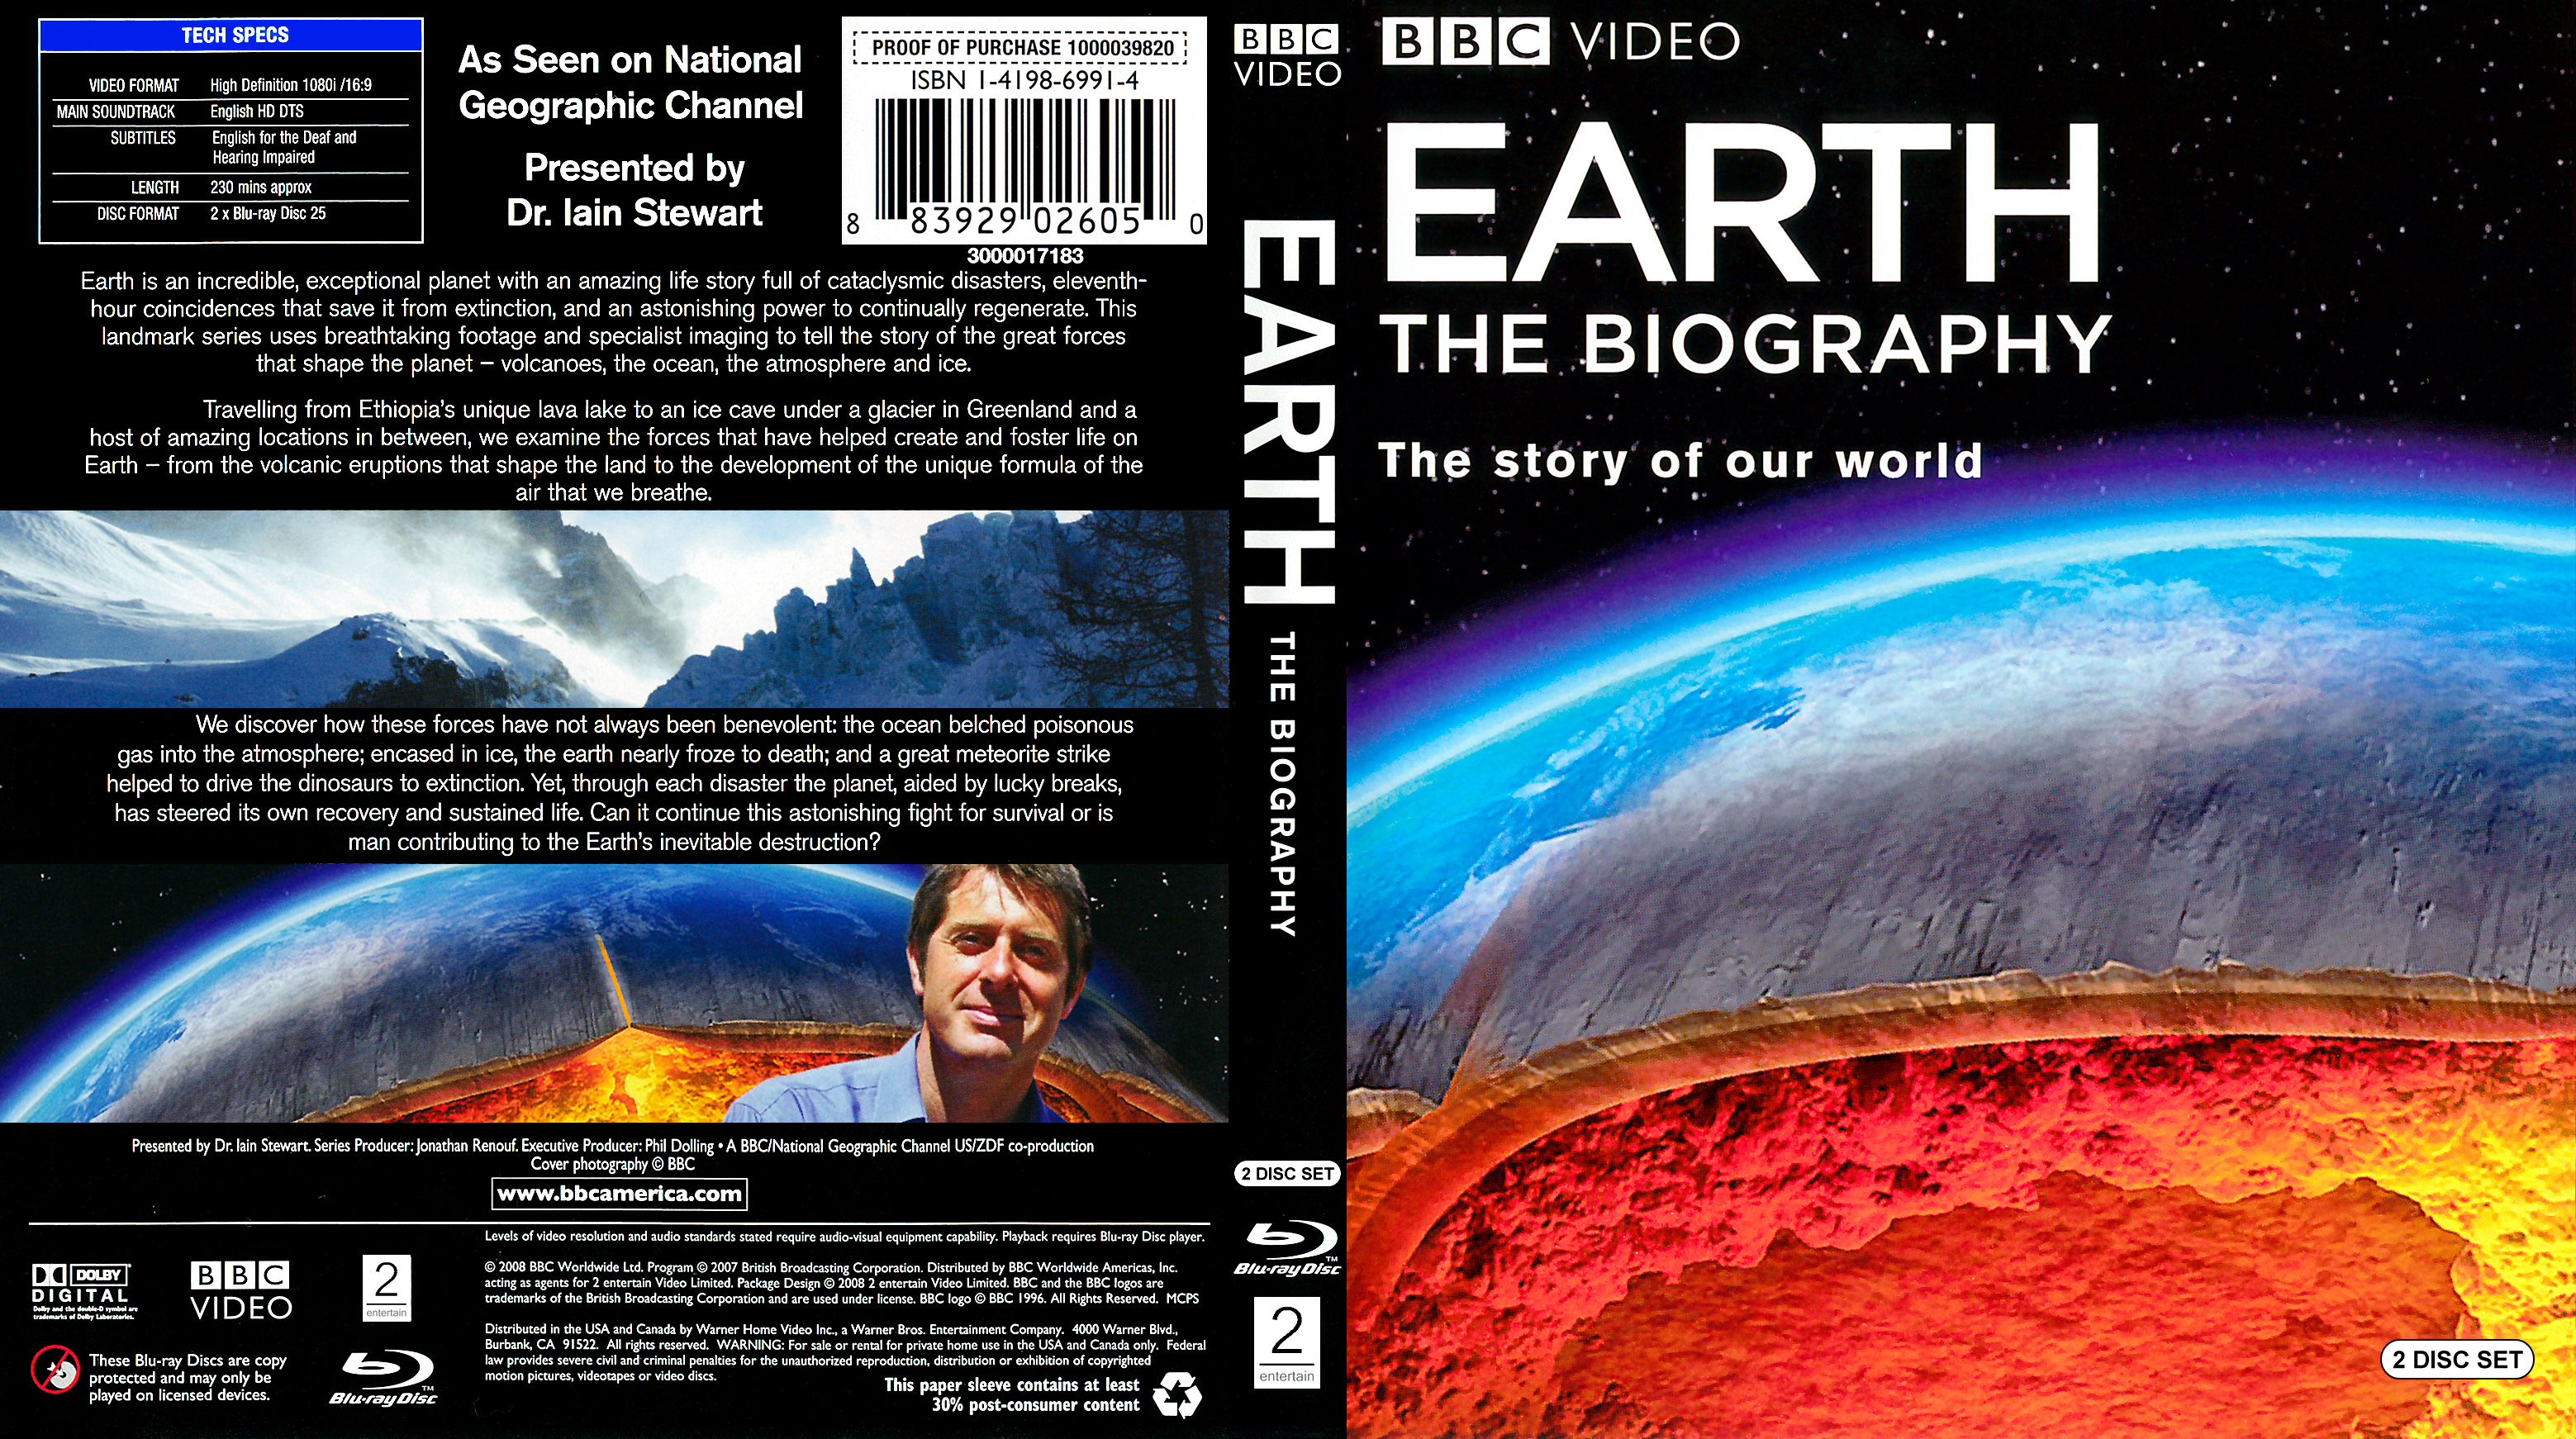 Earth the Biography